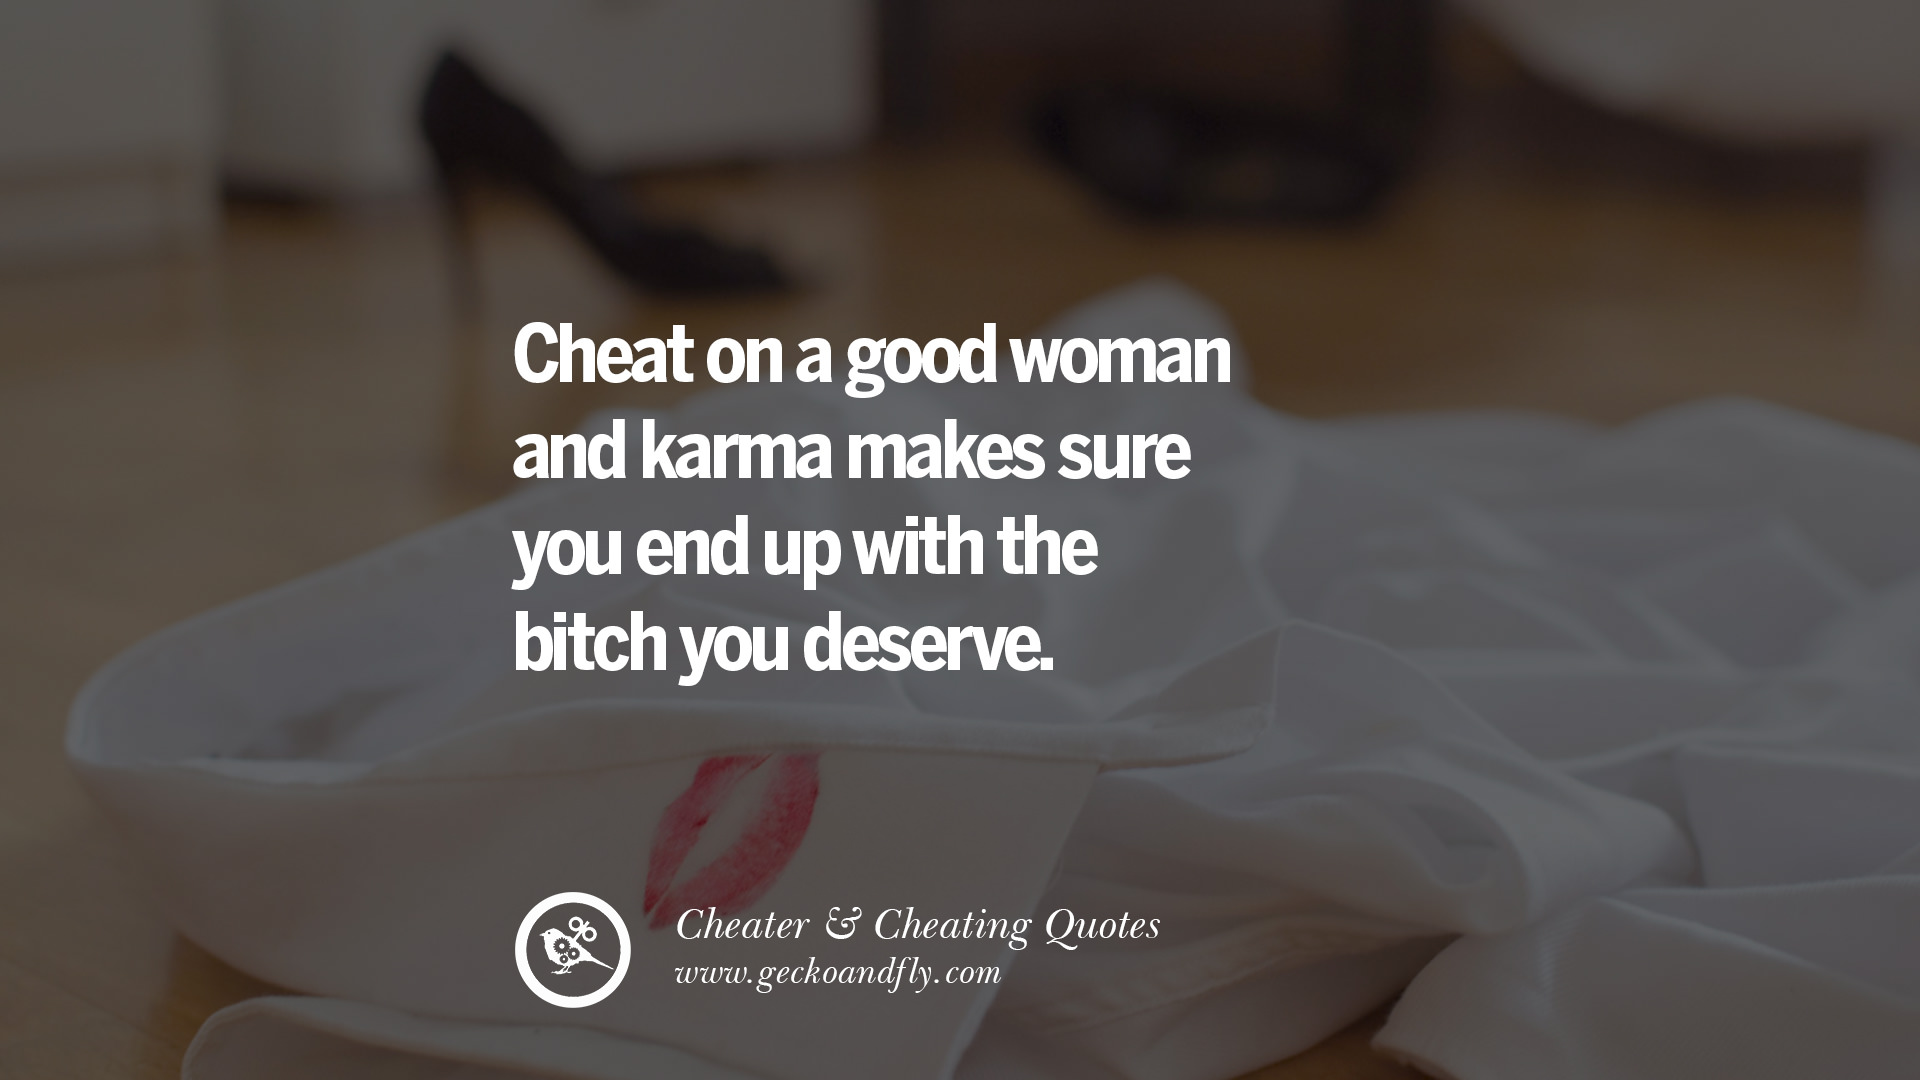 Why women lie and cheat